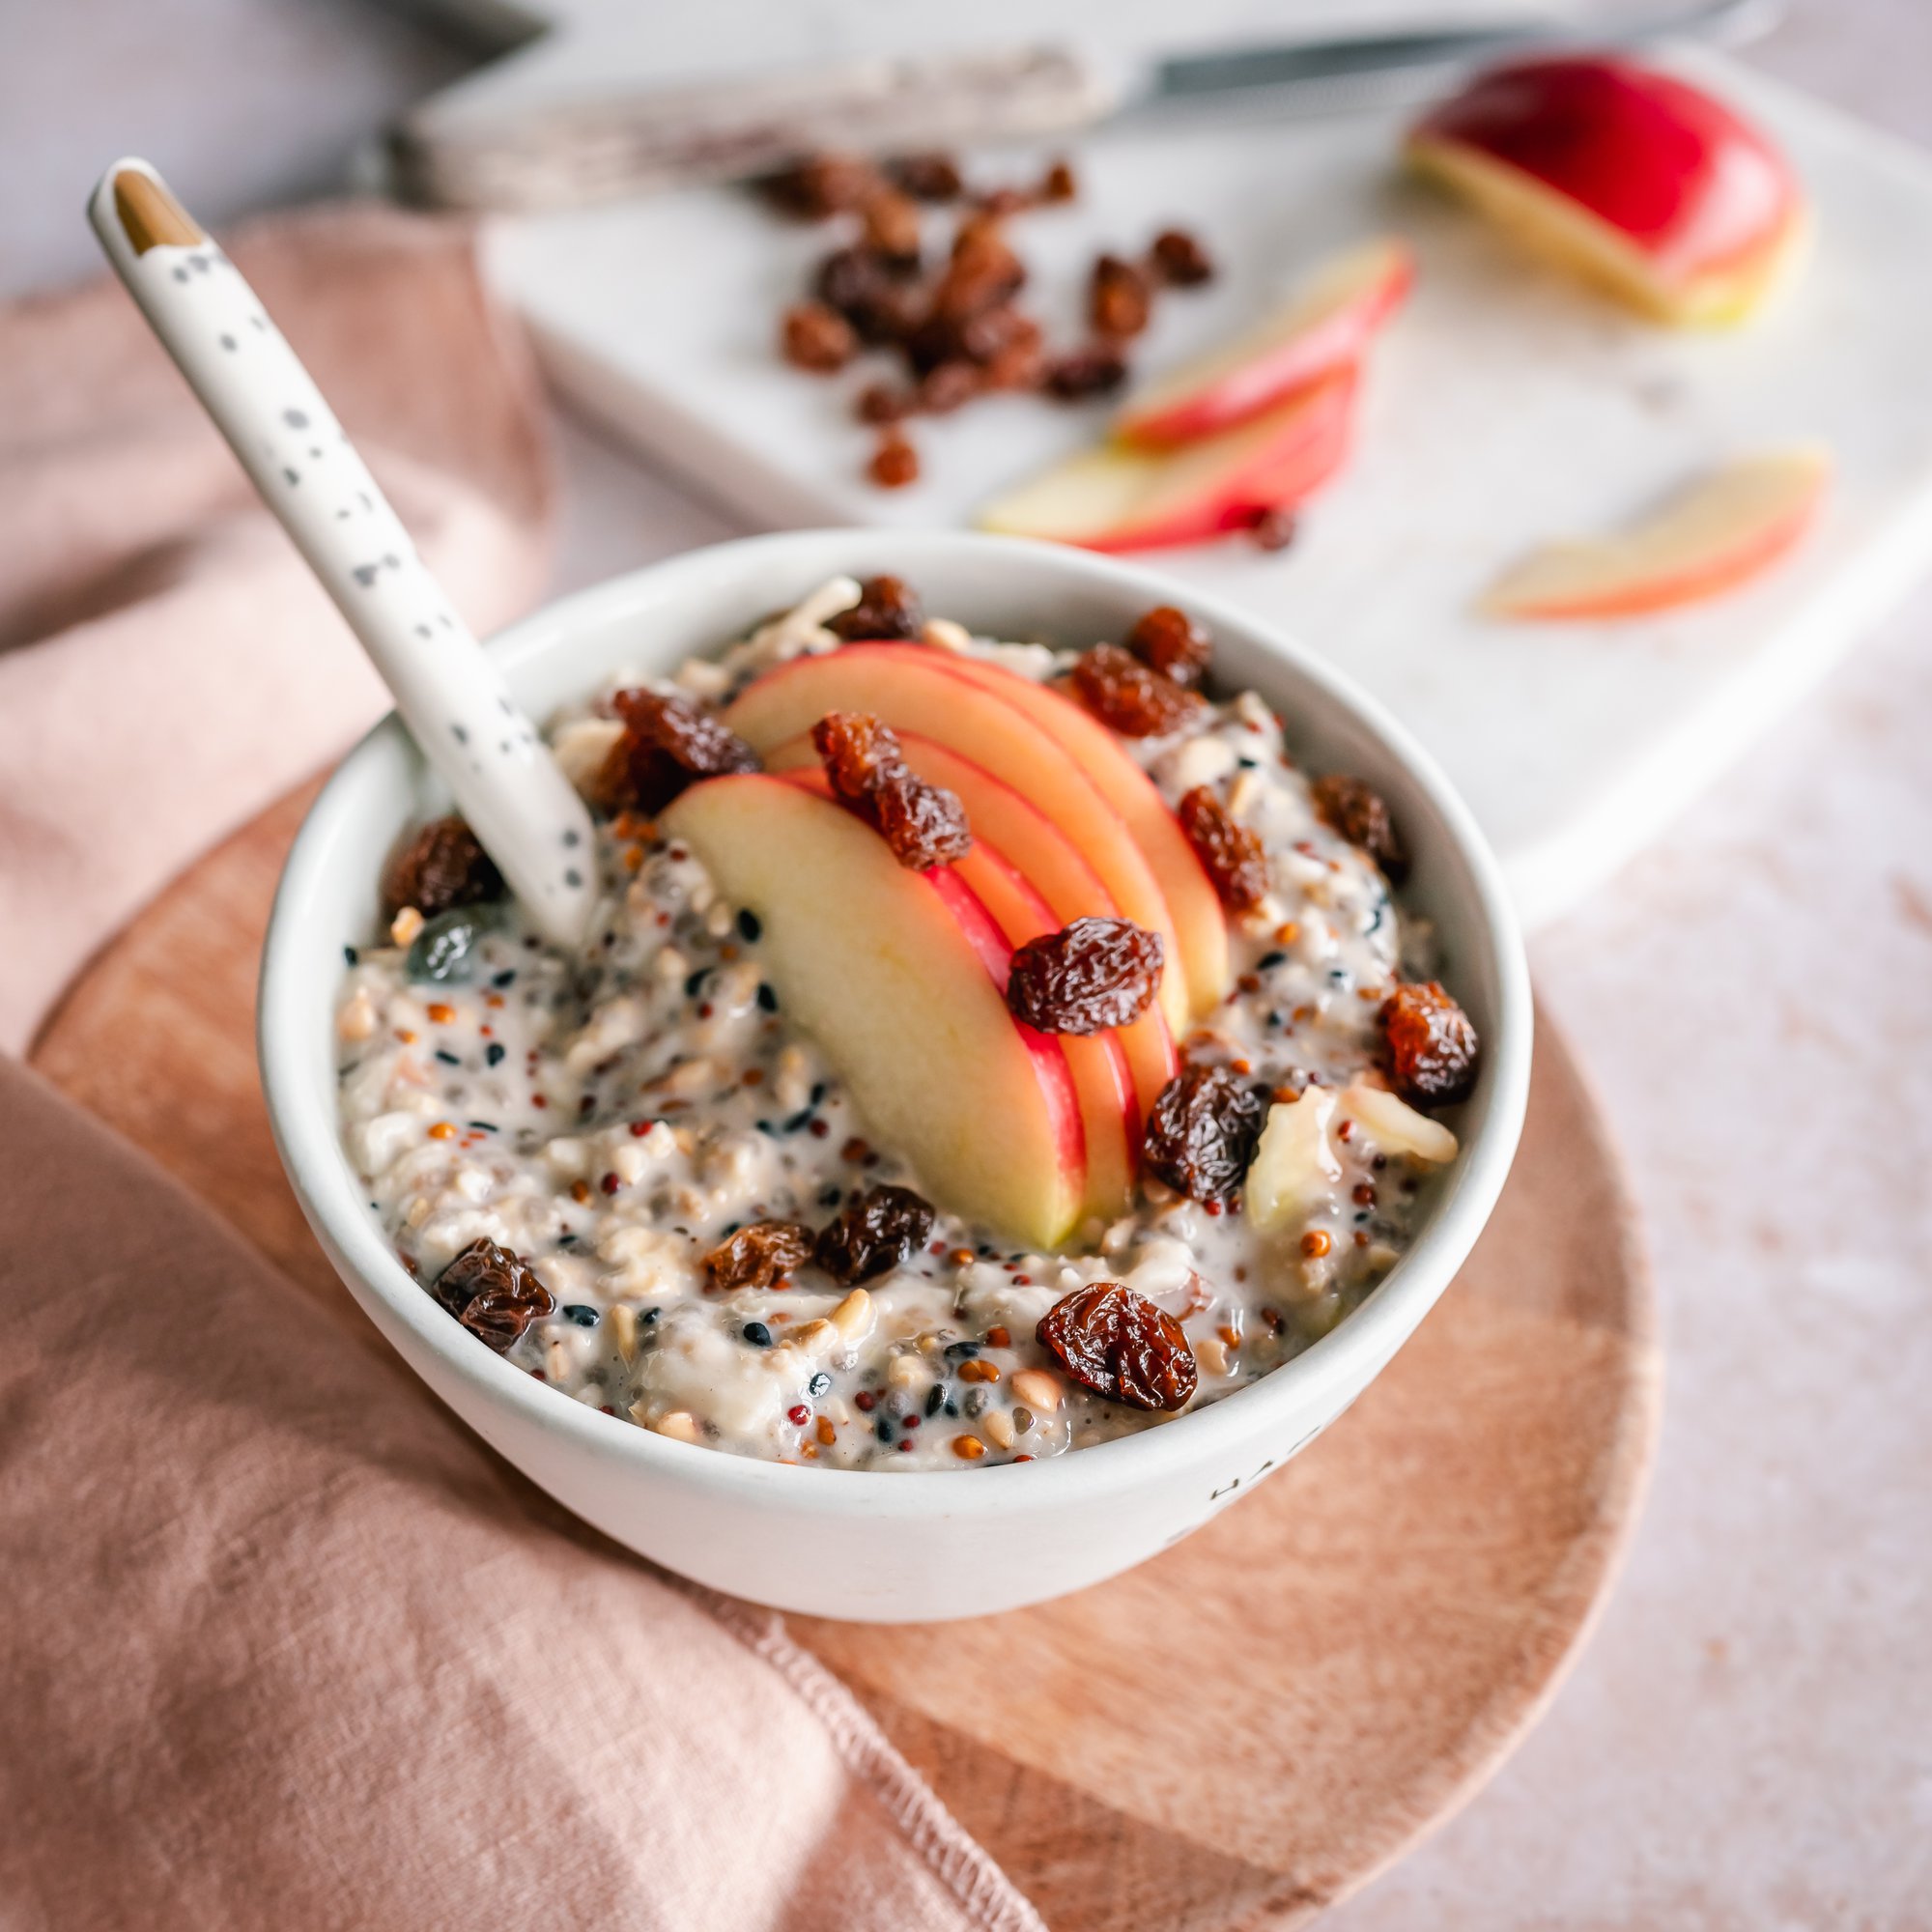 Overnight muesli with SuperSprouts